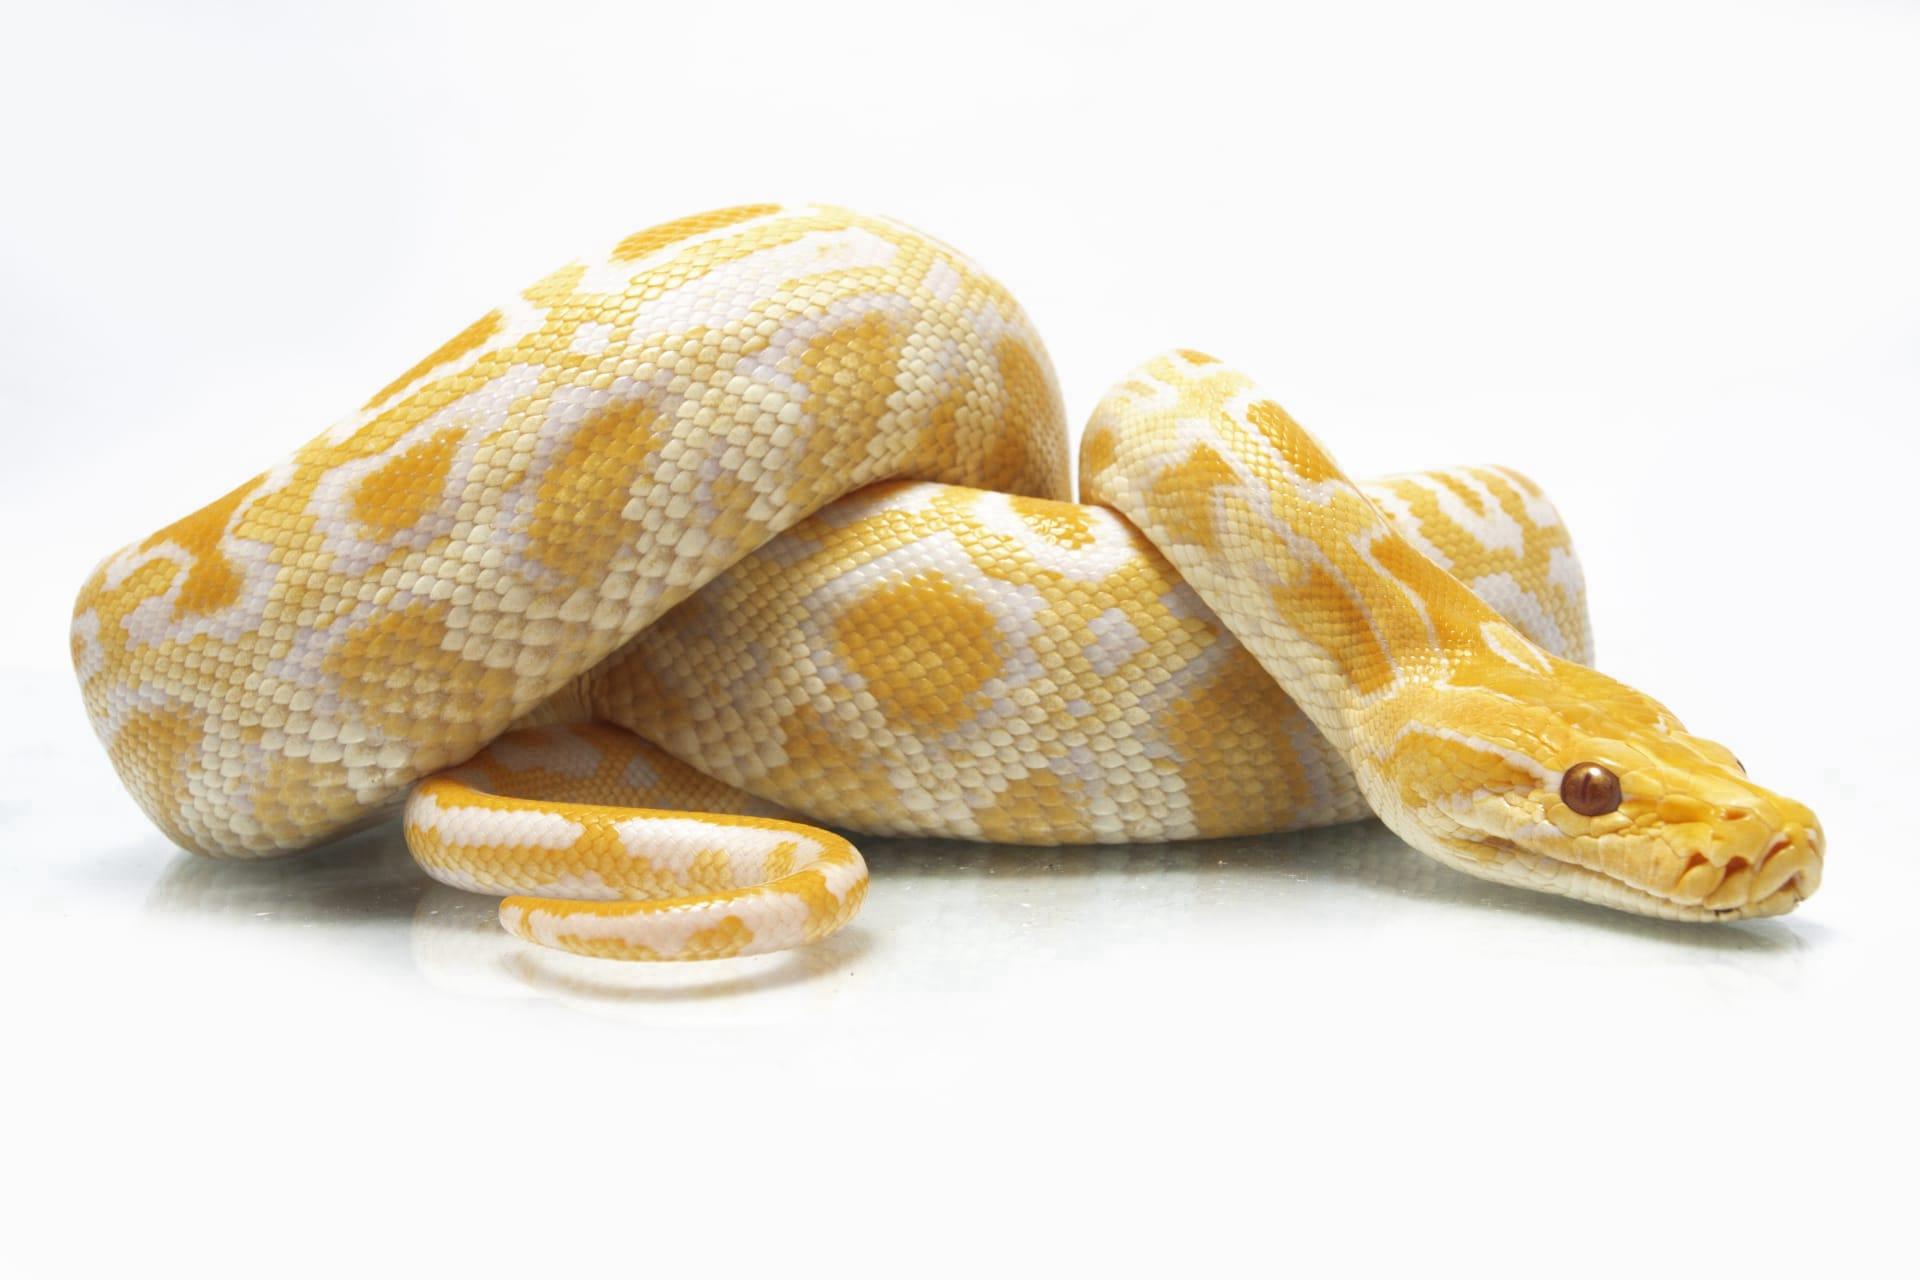 Ball python snake pictures